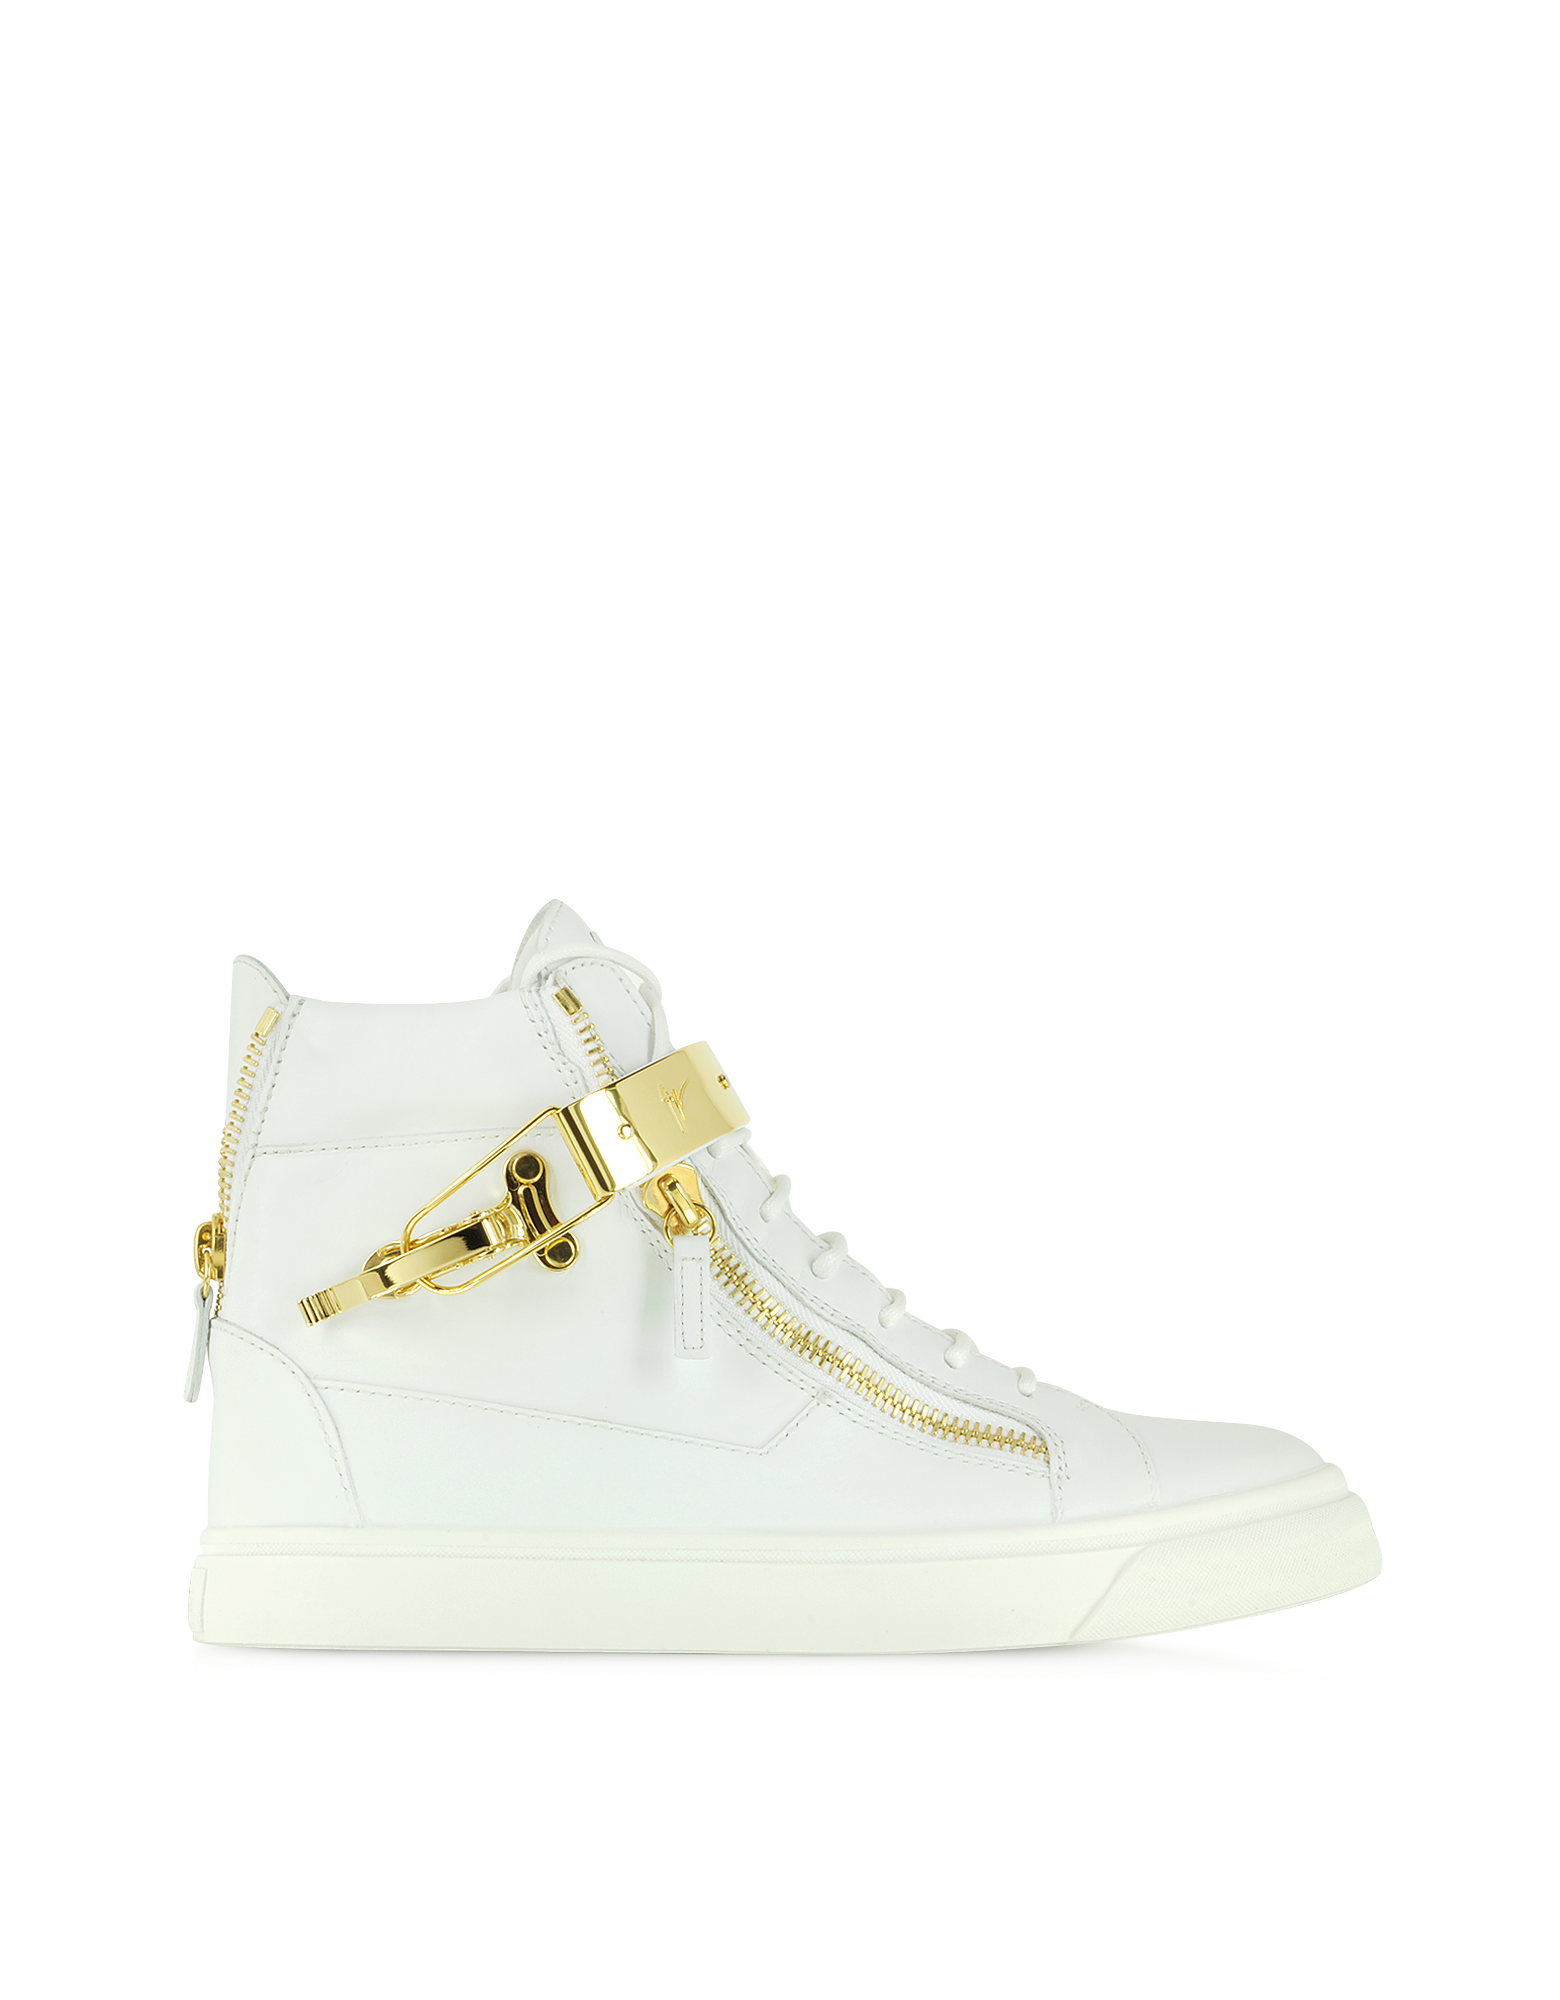 Giuseppe Zanotti shoes, sneakers and the new capsule collection